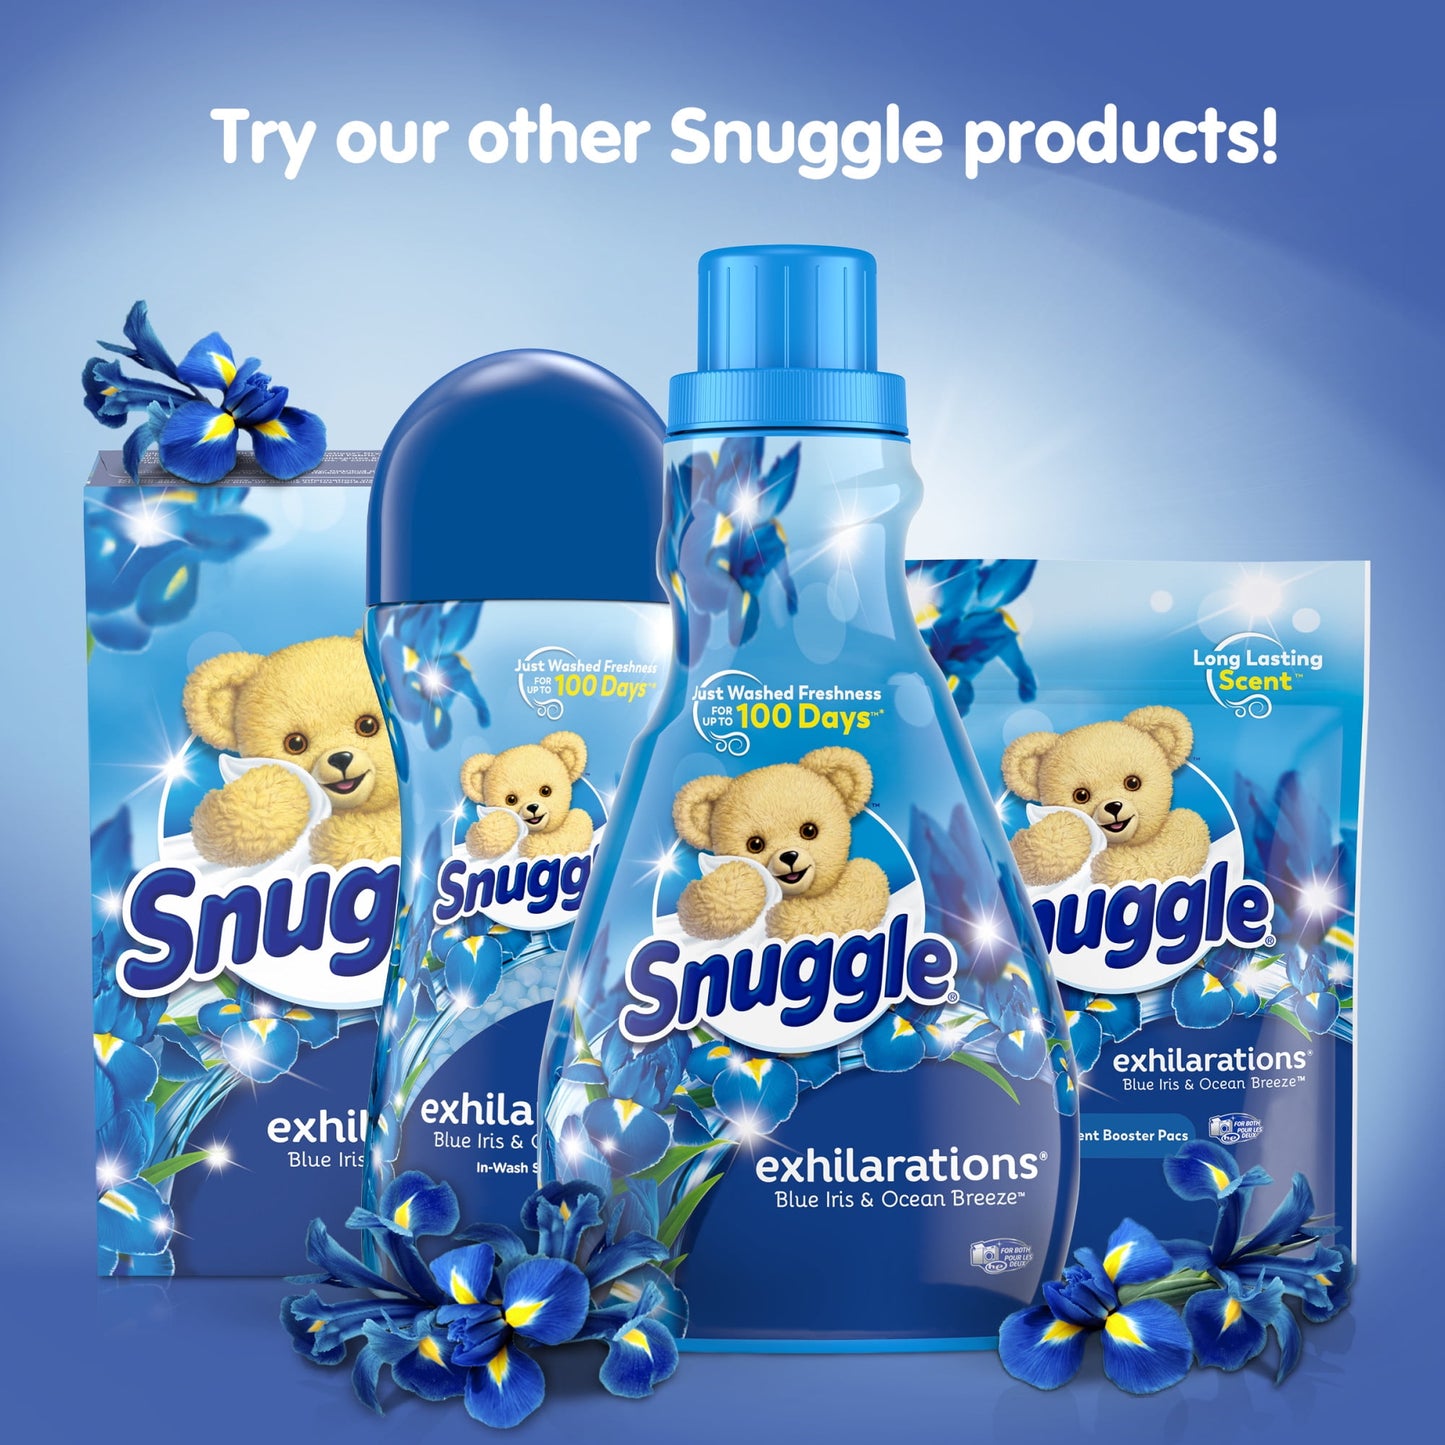 Snuggle Exhilarations In Wash Laundry Scent Booster Pacs, Blue Iris & Ocean Breeze, 56 Count